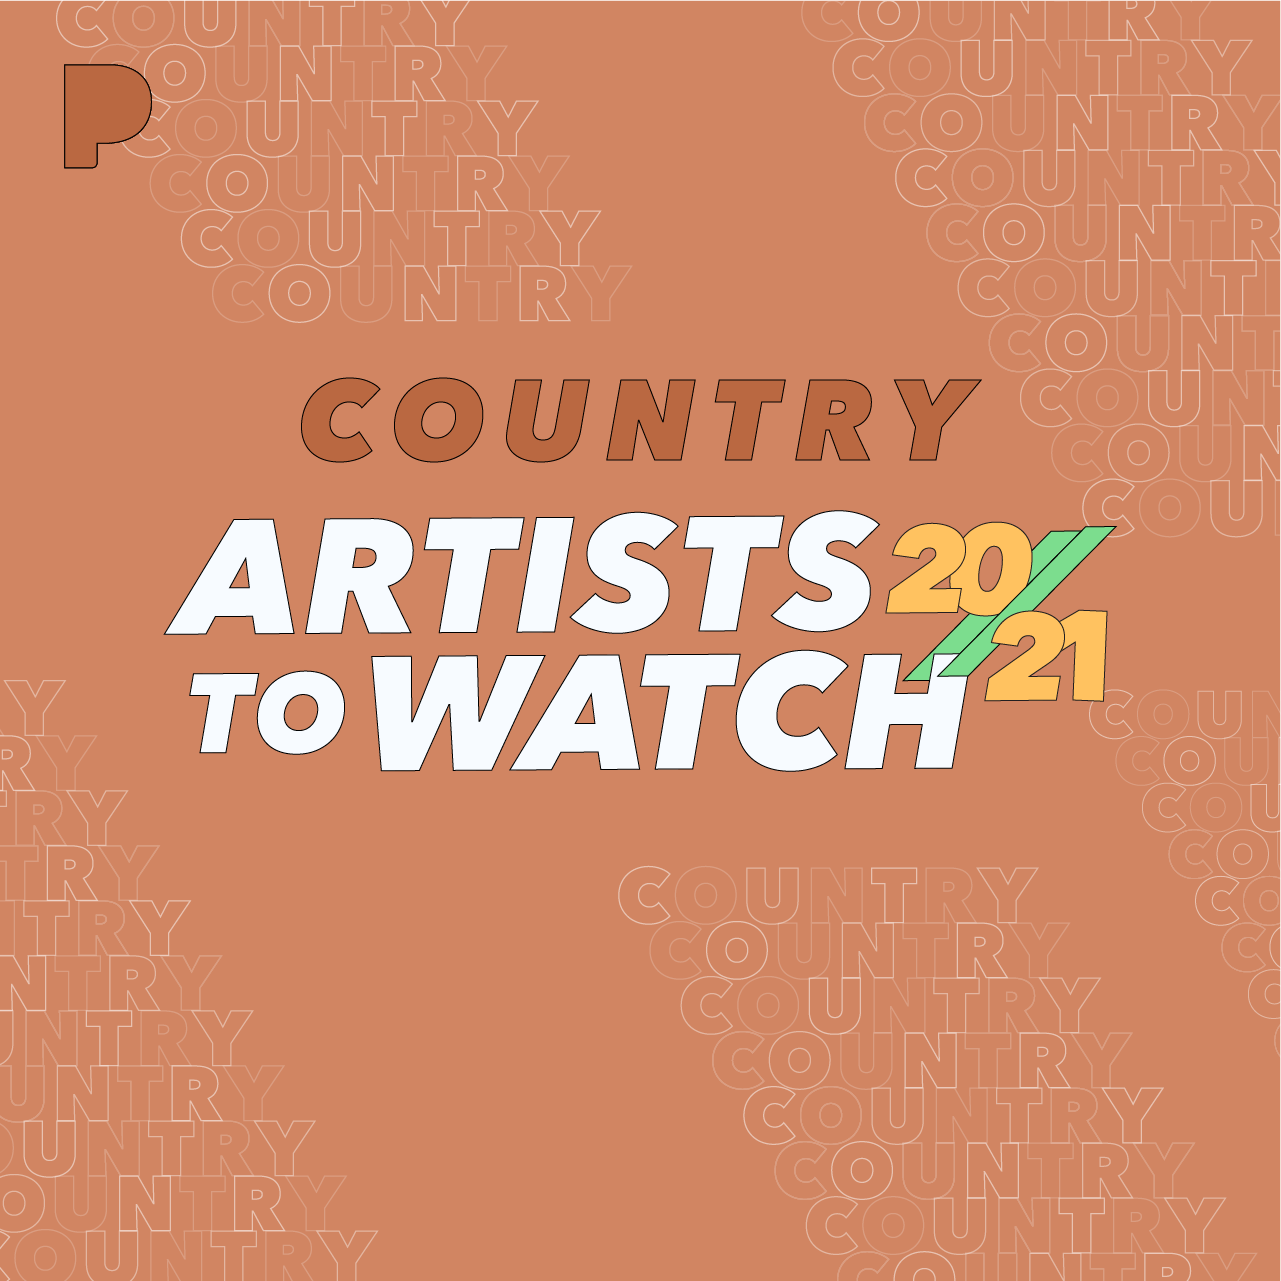 Pandora’s Country Artists to Watch 2021 – Pandora predicts the country artists to make it big next year